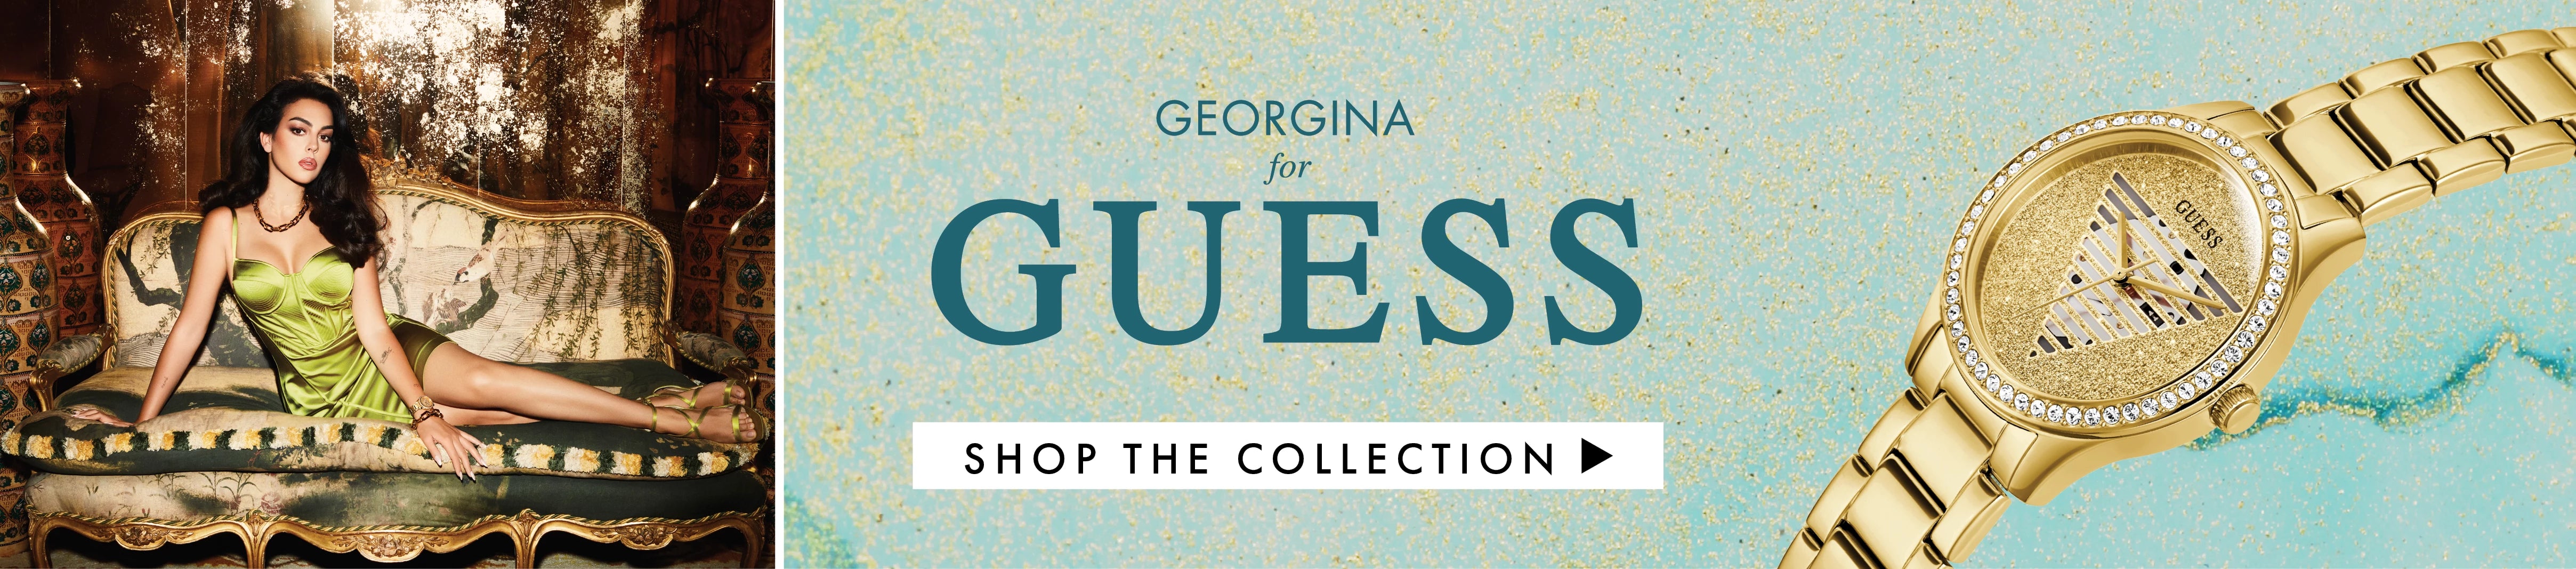 Guess Shipping Buy | - Online, Depot Watches Watch Free